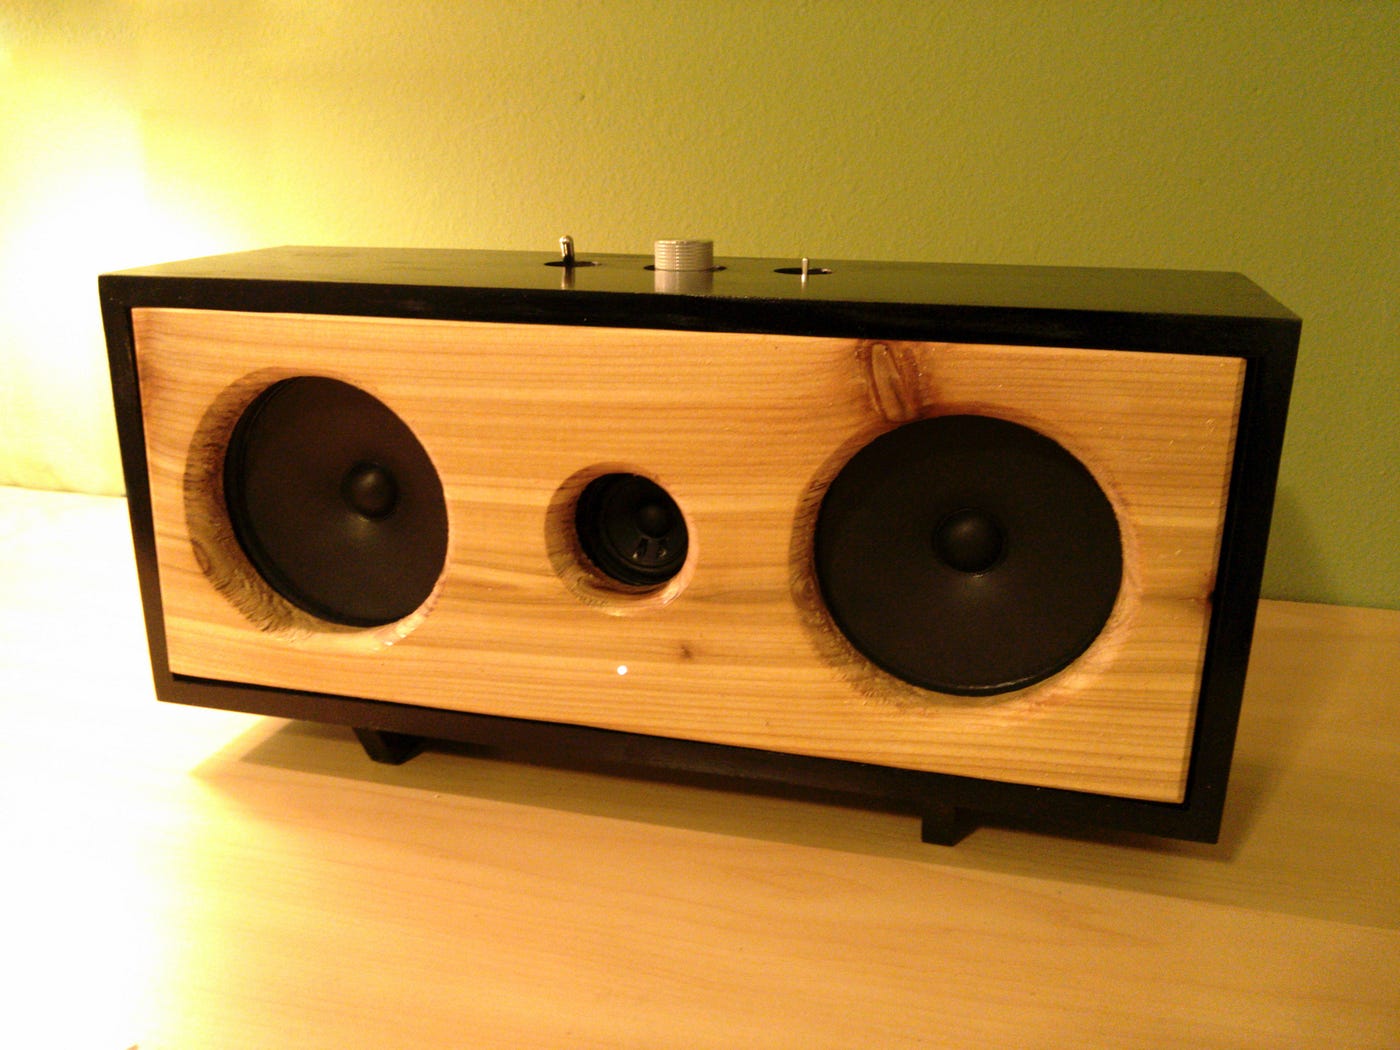 How to build a bluetooth speaker. A do-it-yourself adventure. | by Kevin  Thornbloom | Medium